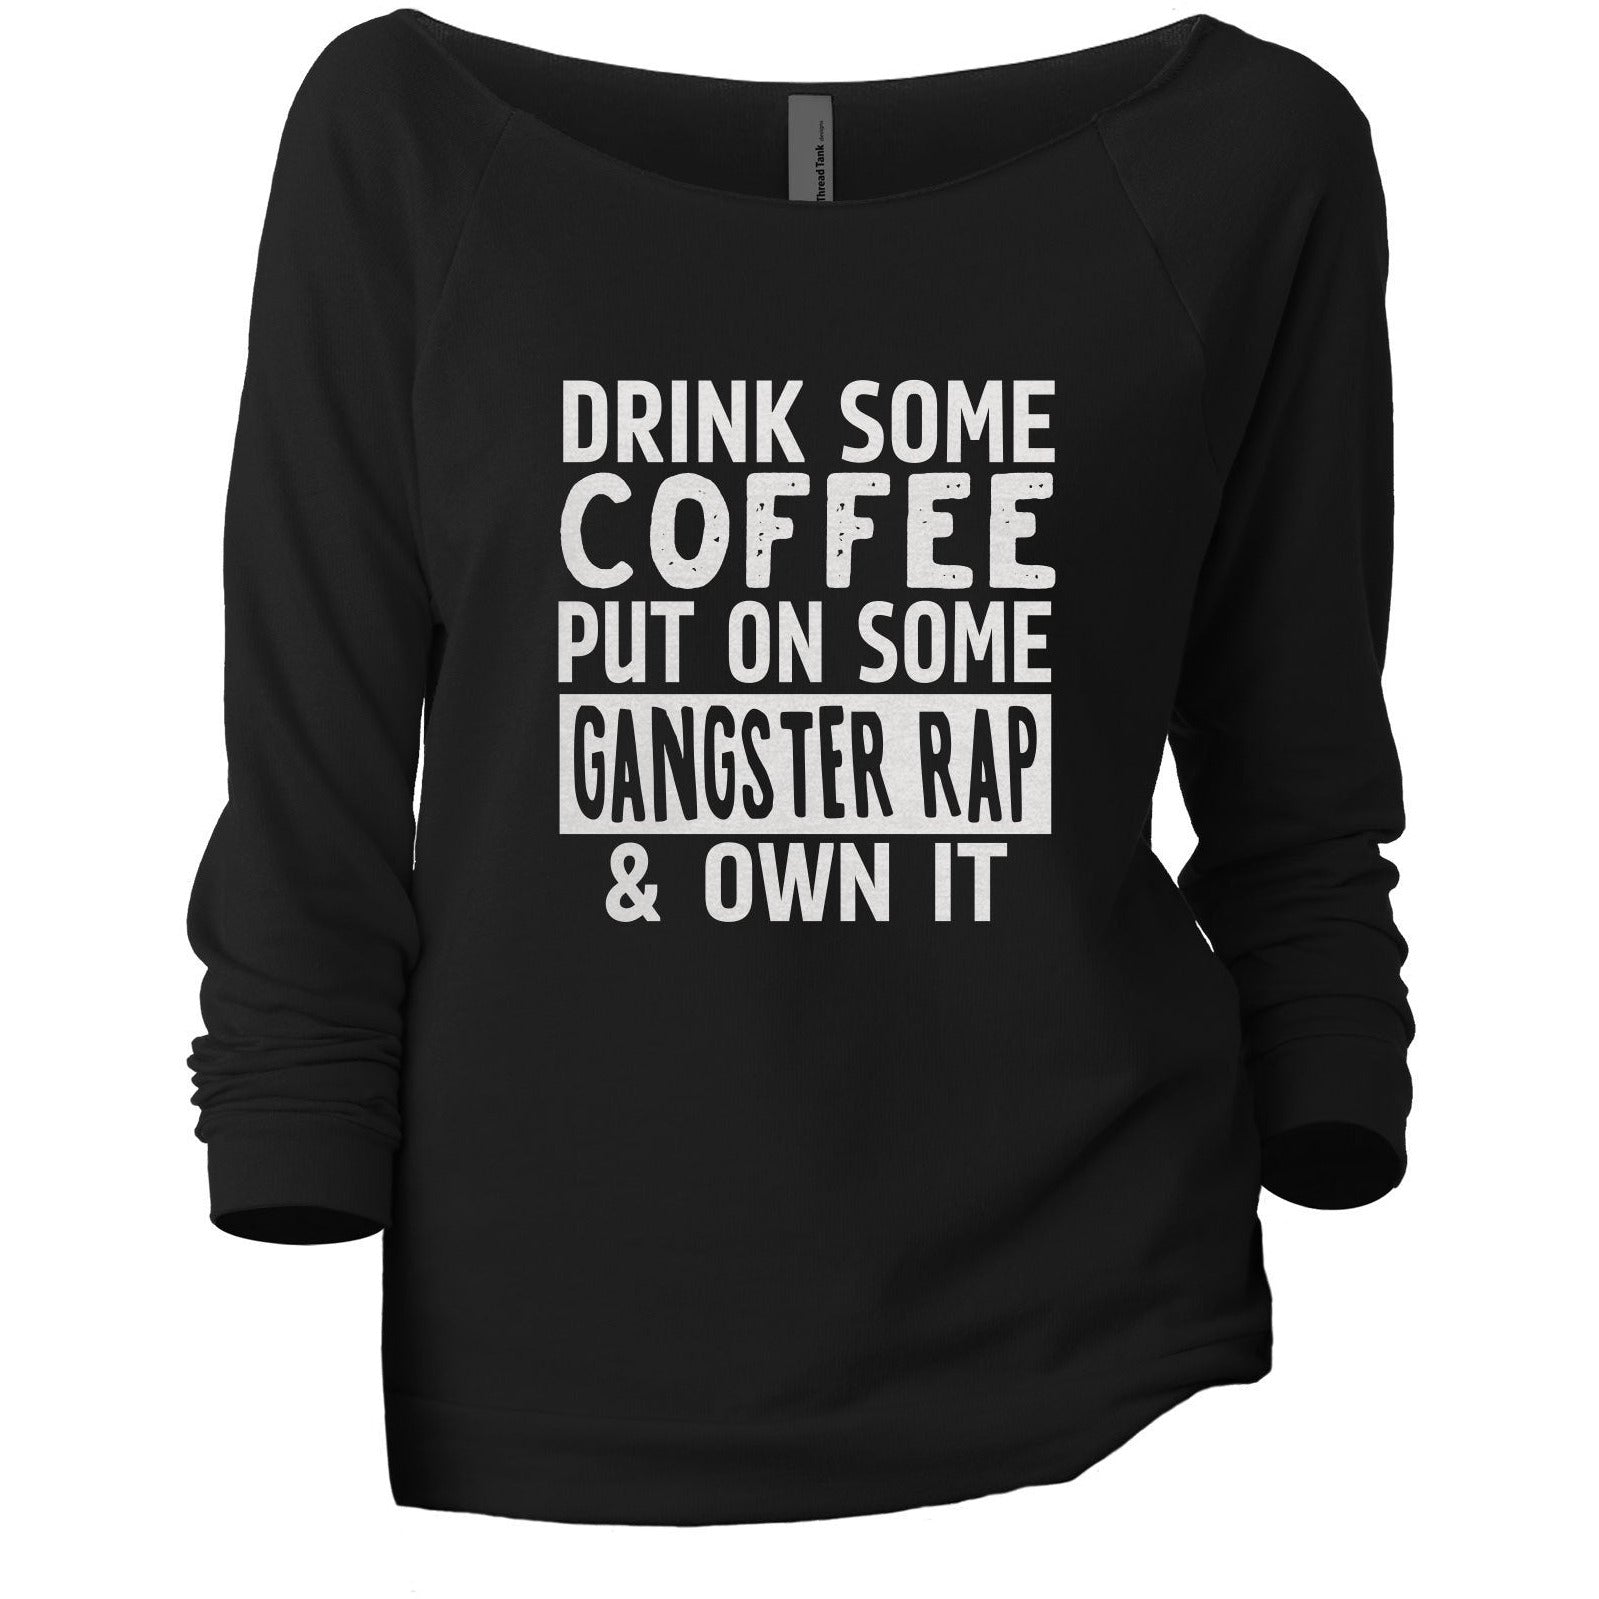 Drink Some Coffee Put on Some Gangster Rap and Own It Women's Graphic Printed Lightweight Slouchy 3/4 Sleeves Sweatshirt Sport Grey